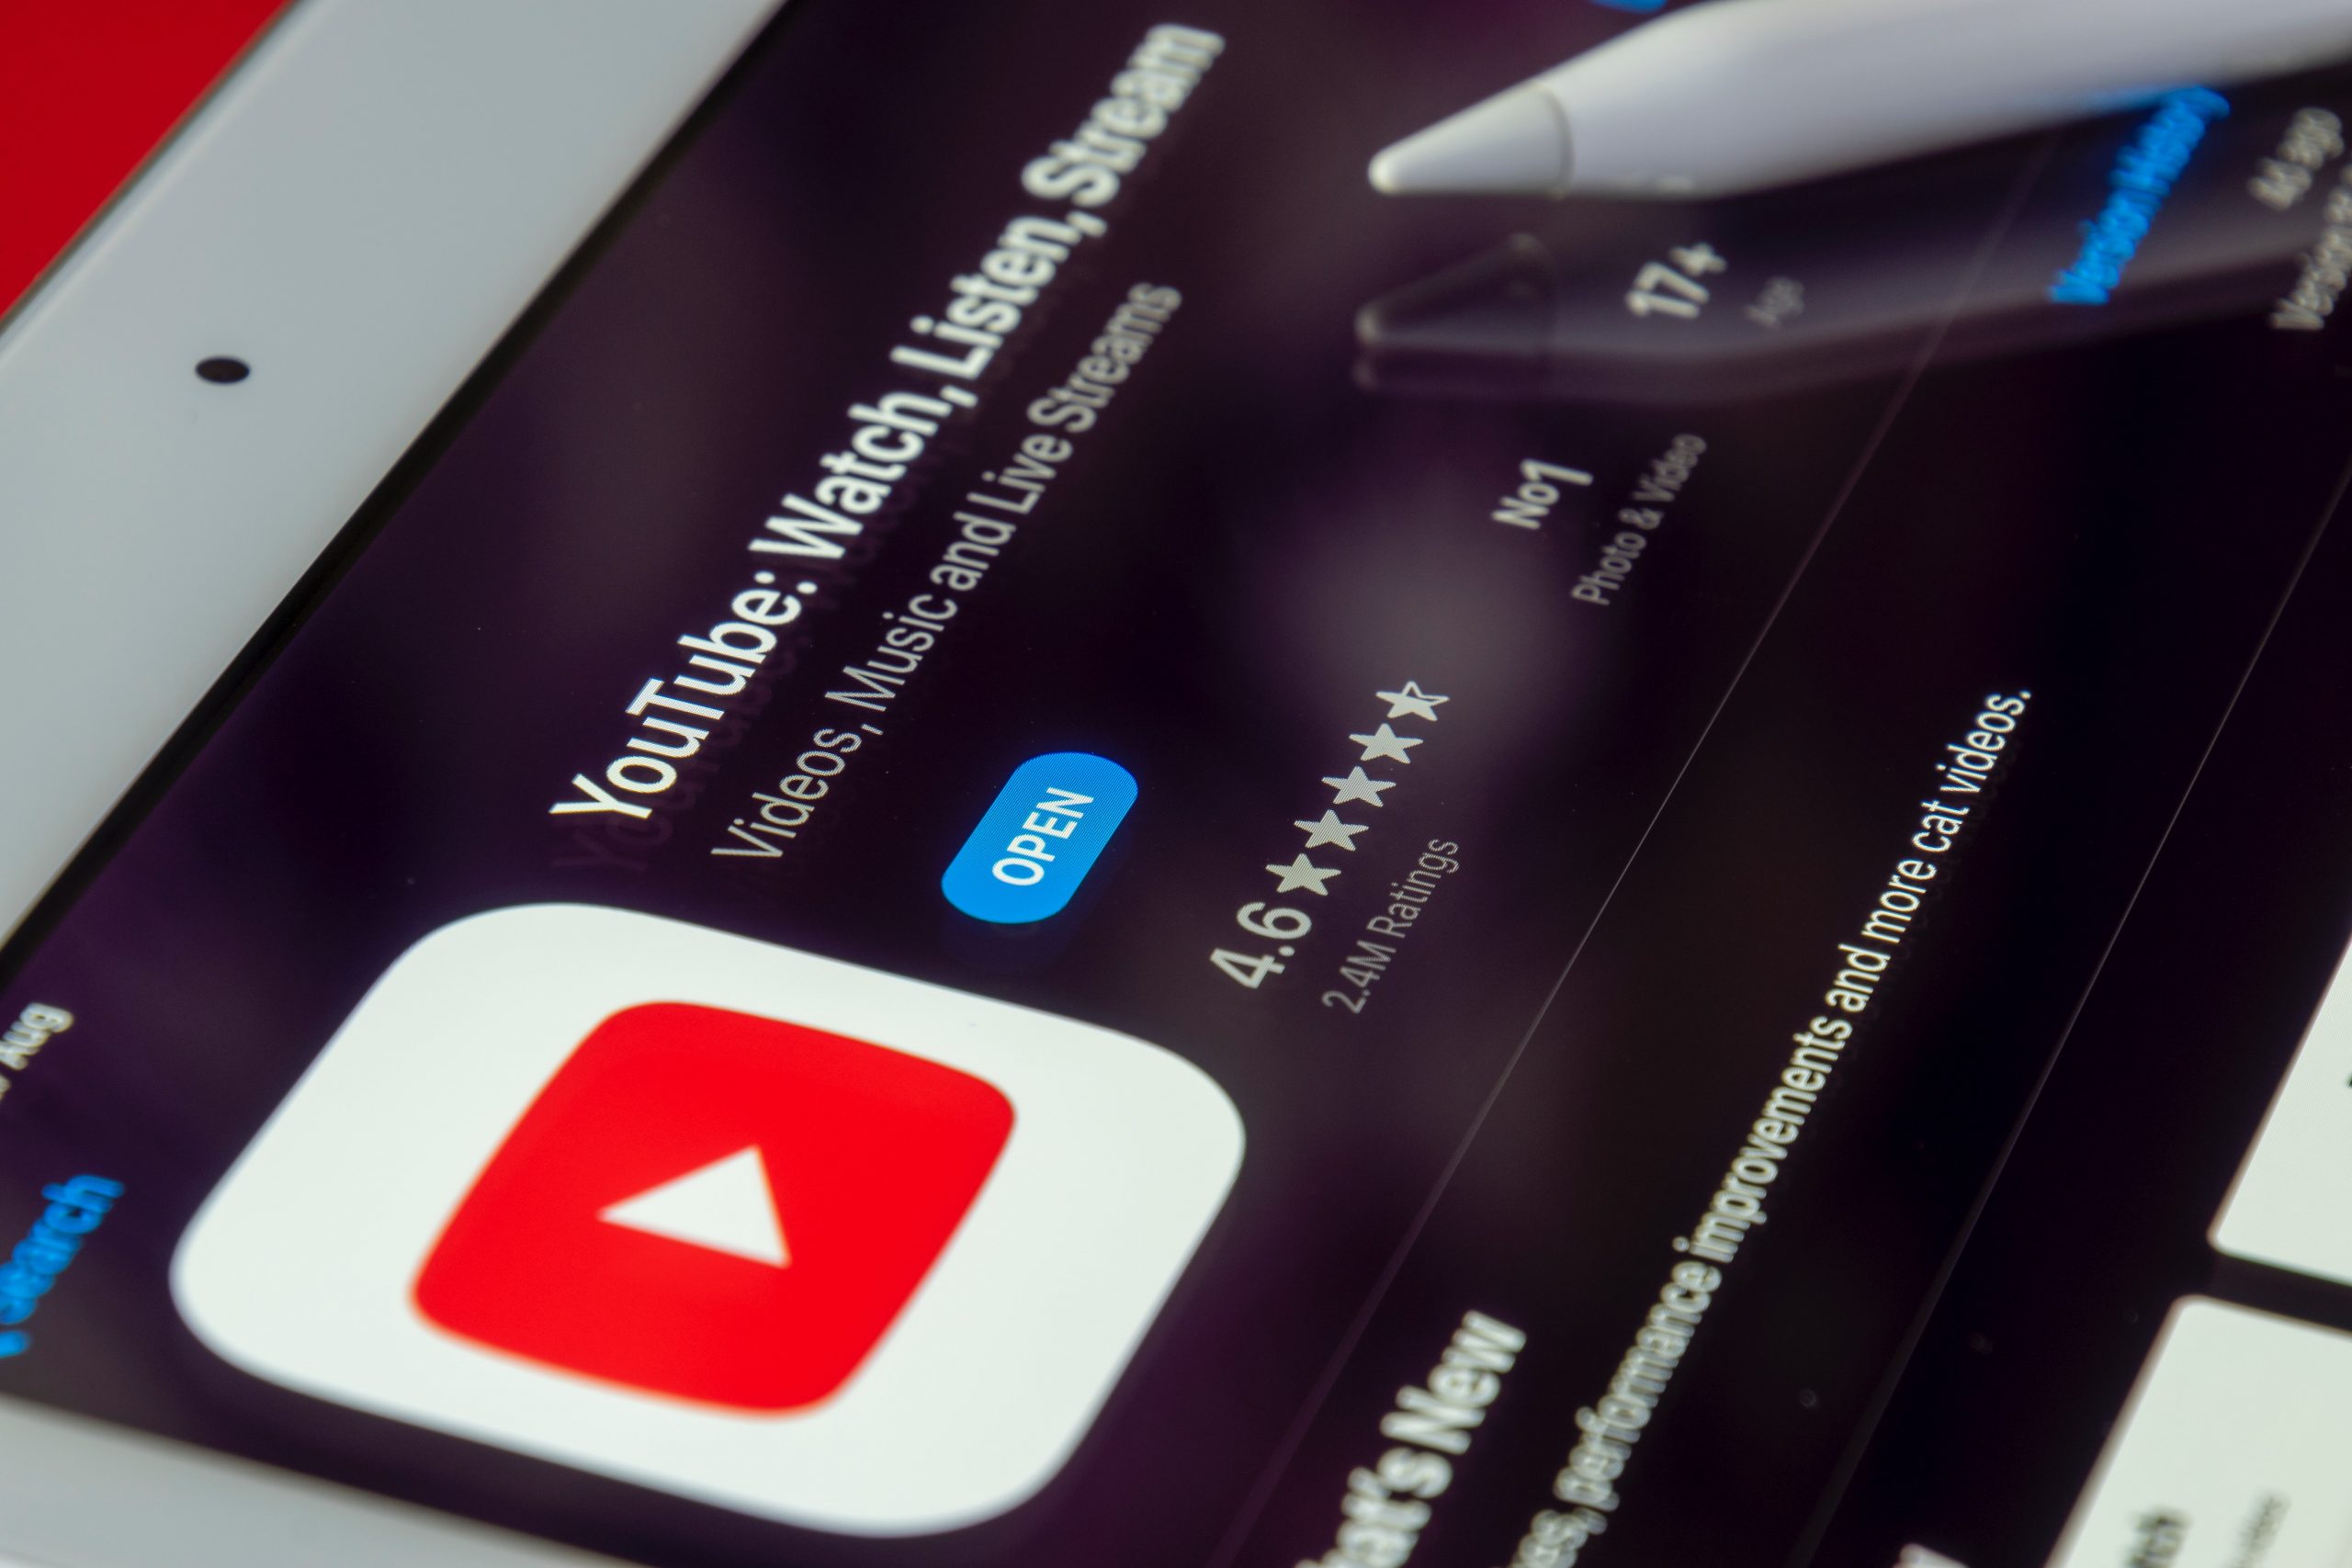 YouTube have paid over $4 billion to the music industry in the past 12 months